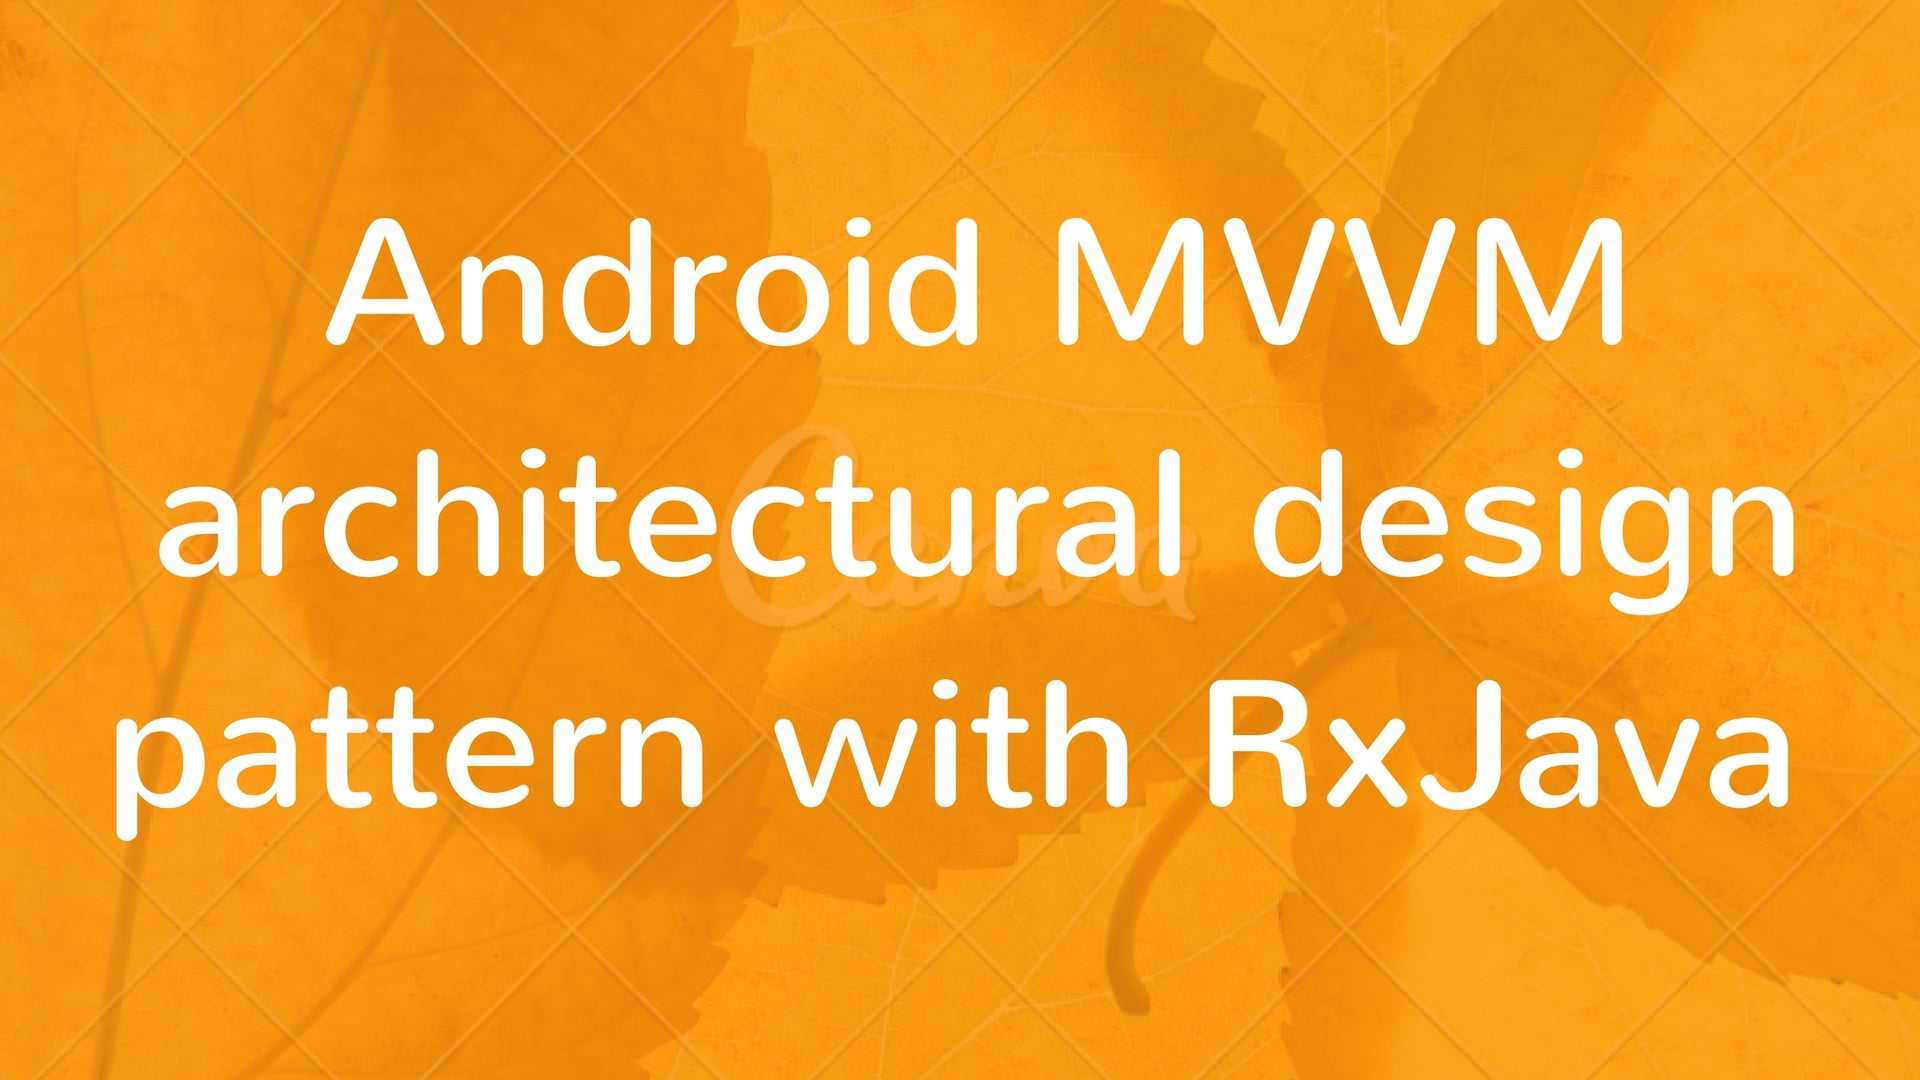 Android MVVM architectural design pattern with RxJava in Kotlin